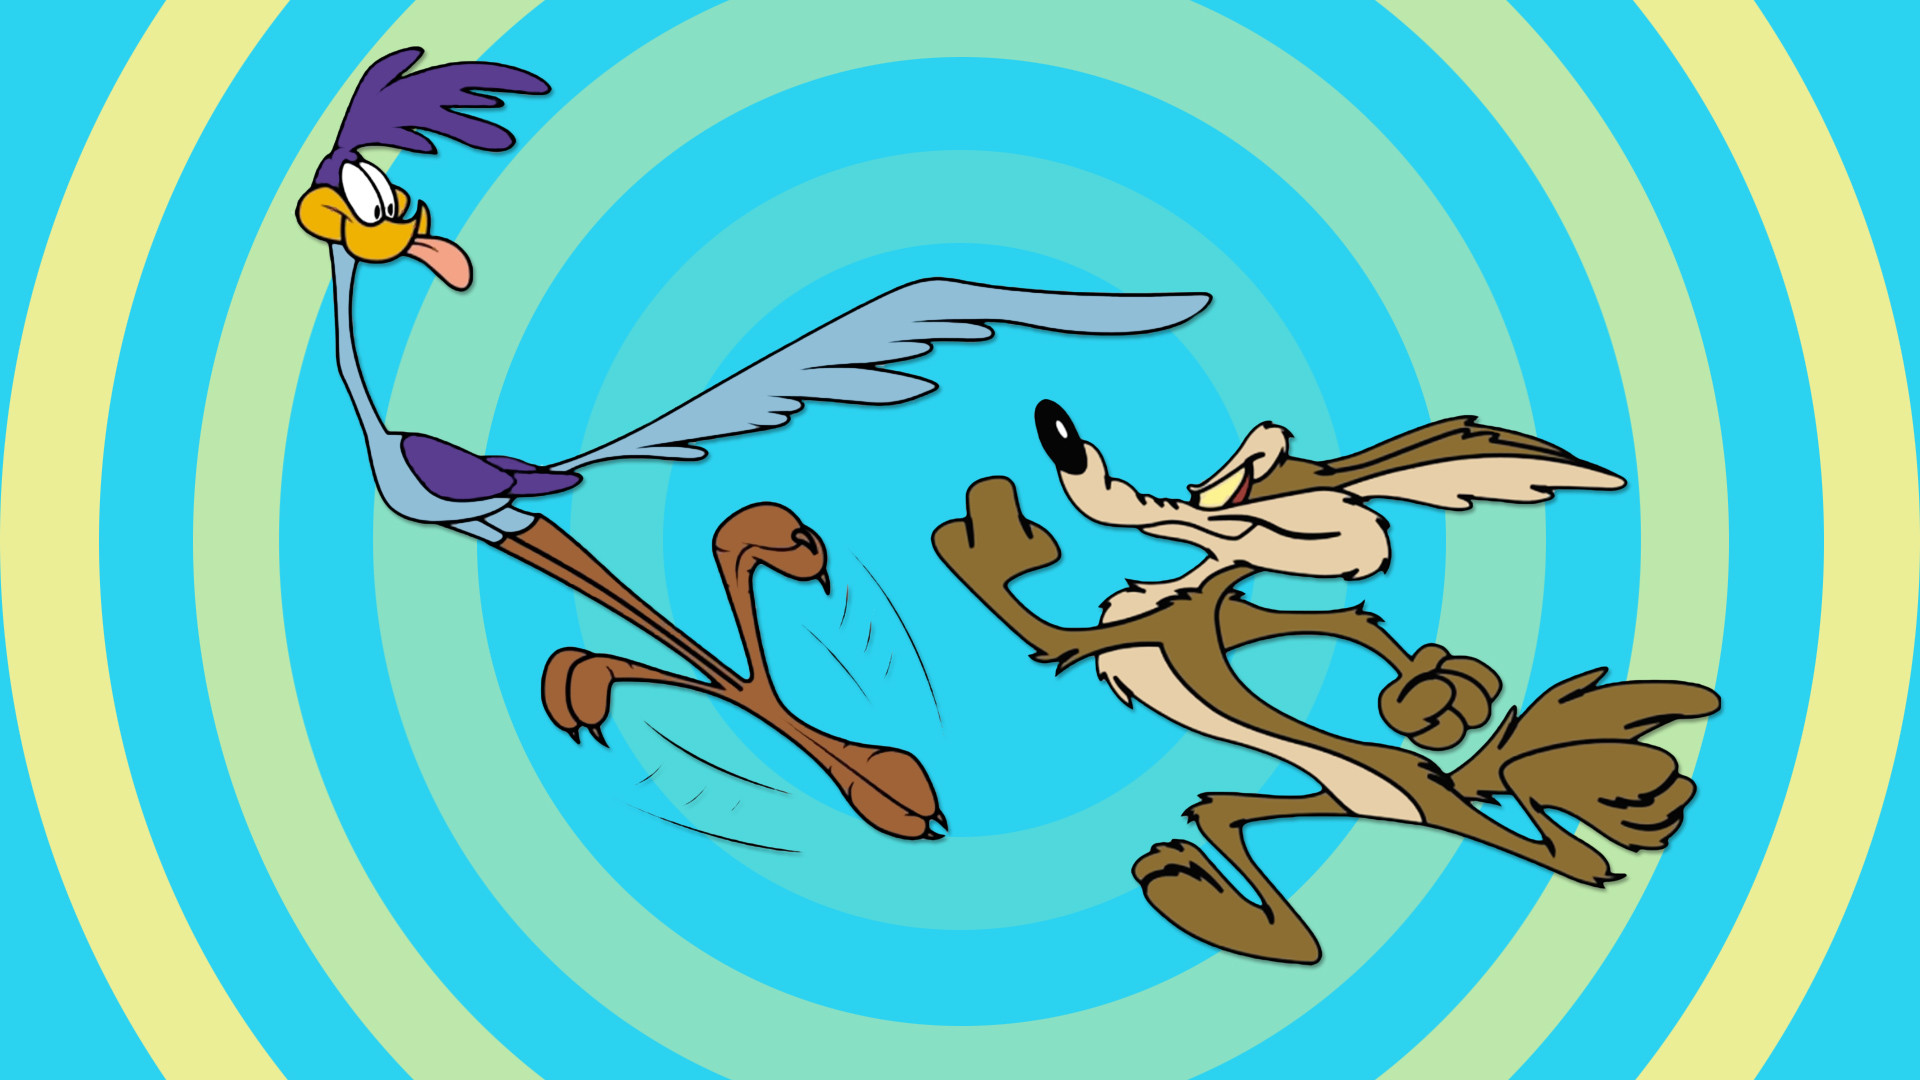 1920x1080 1 Road Runner and Wile E. Coyote HD Wallpapers | Backgrounds - Wallpaper  Abyss